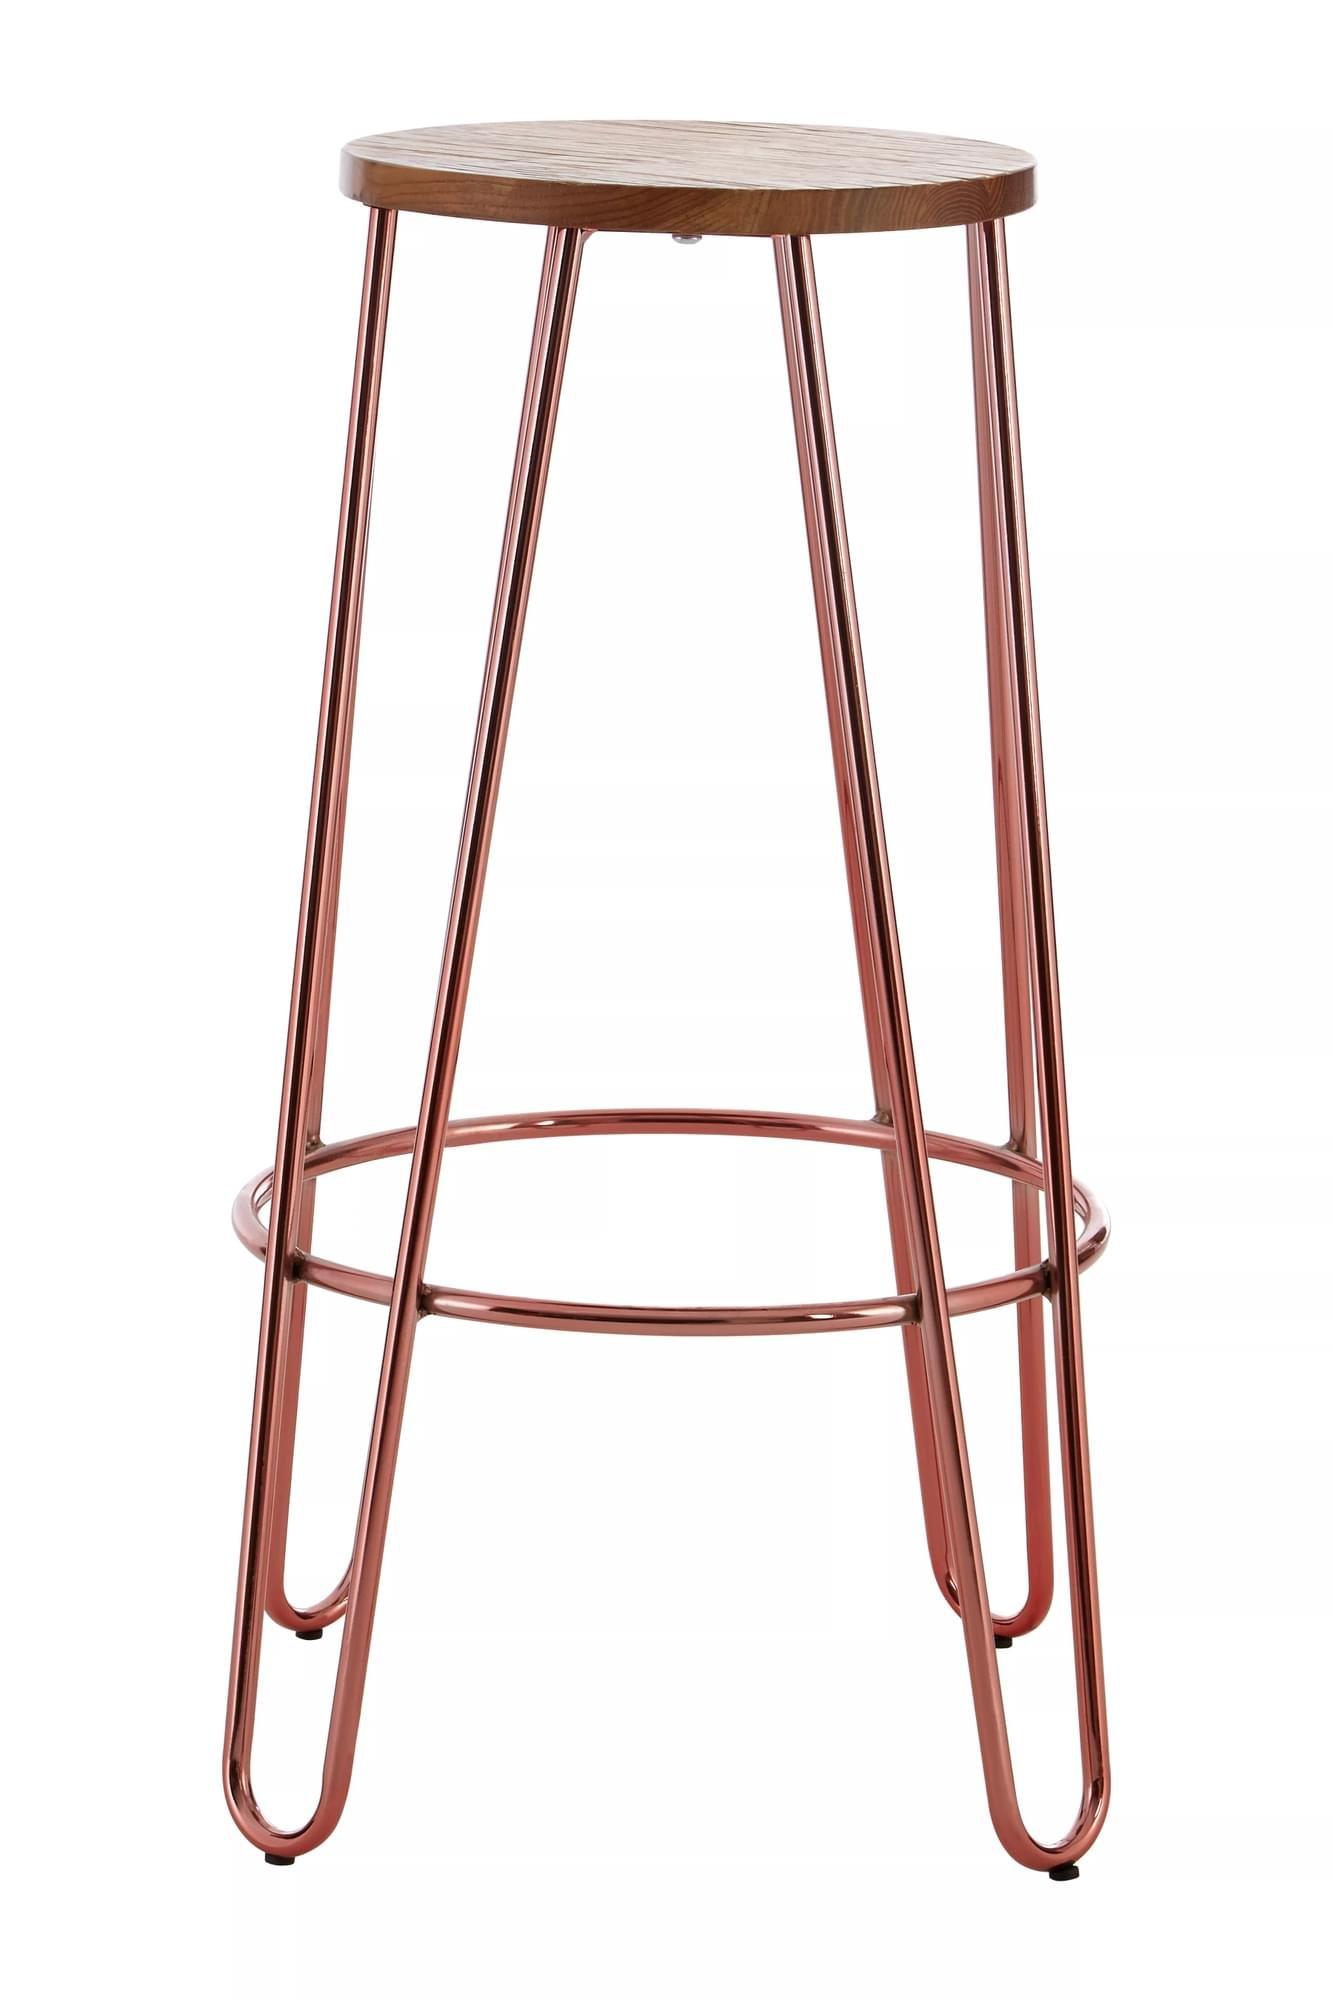 Interiors by Premier Rose Gold Metal and Elm Wood Round Bar Stool, Hairpin Stool, Sturdy Stool for B